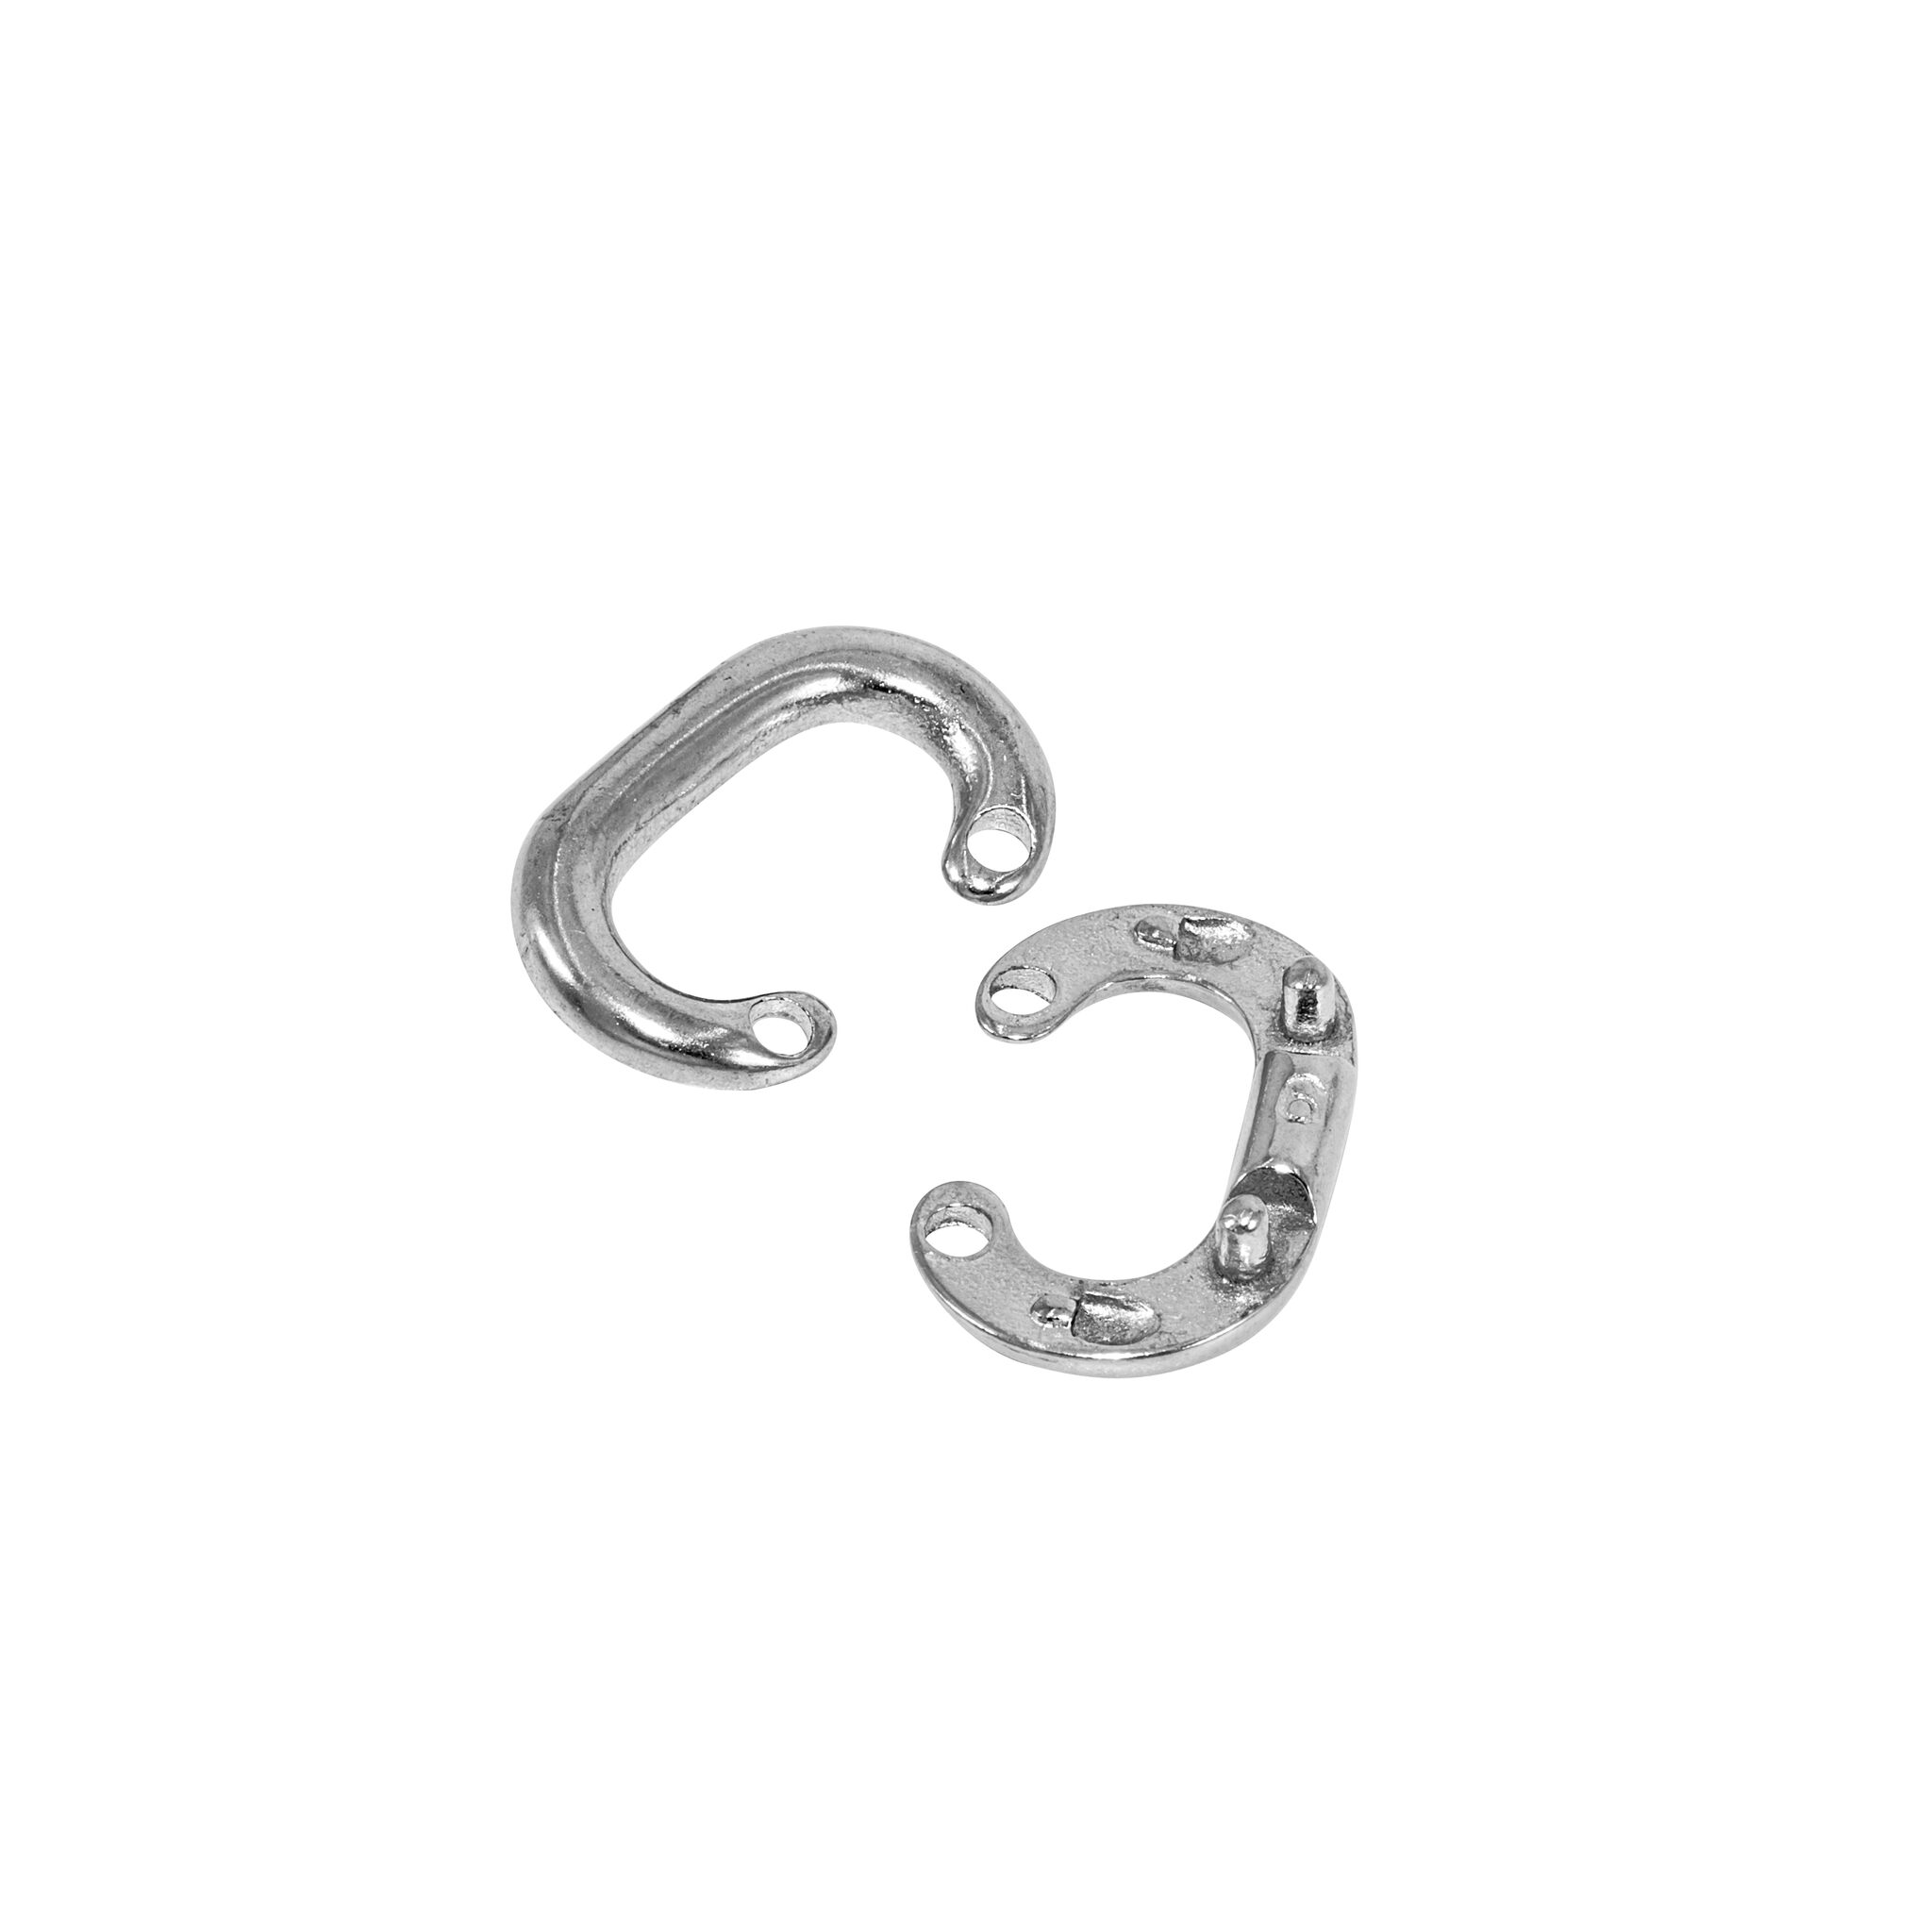 Stainless steel chain emergency link